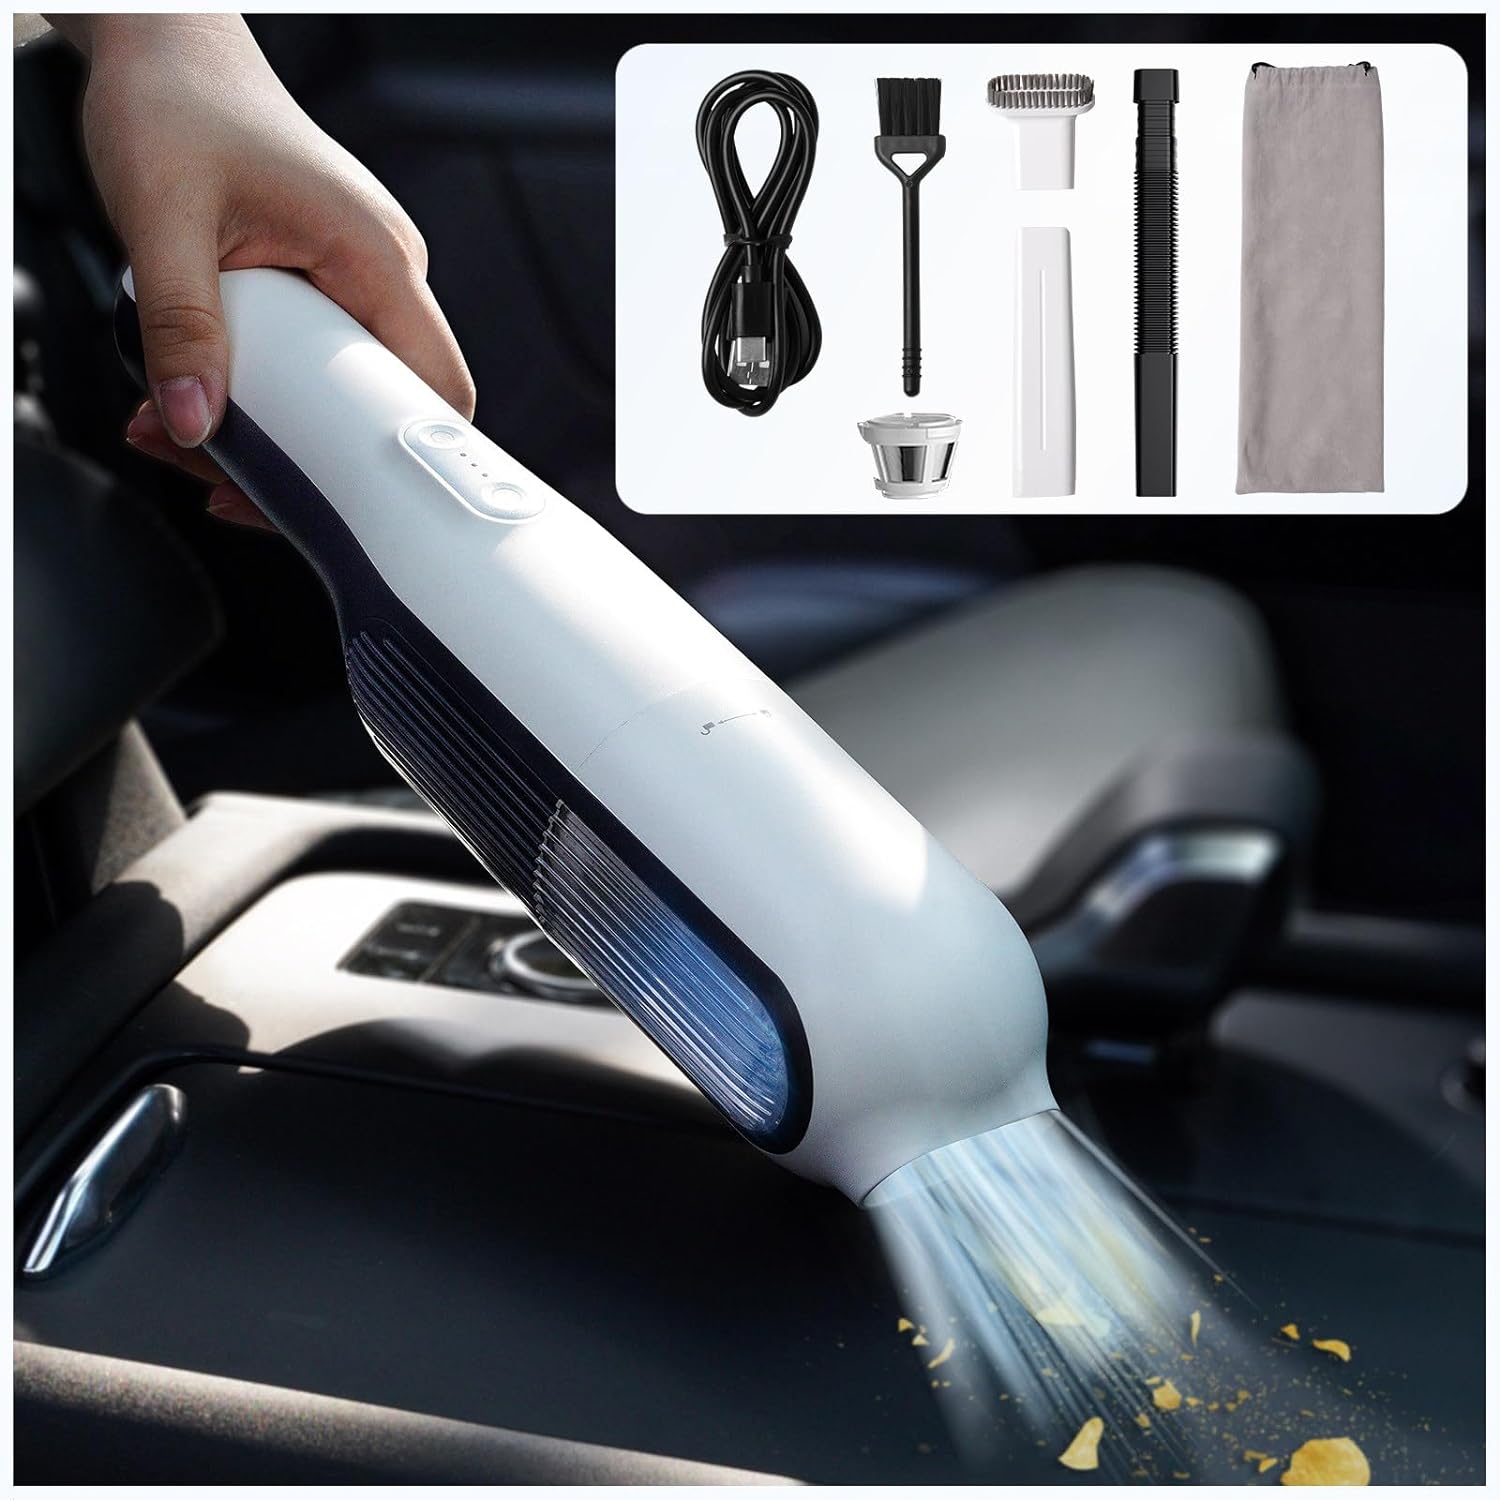 LISEN Portable Handheld Vacuum for Dust Pet Hair Dirt, Powerful Suction Mini Car Vacuum Cleaner Lightweight Hand Held Vacuum Cordless Rechargeable Home Dust Busters Cordless